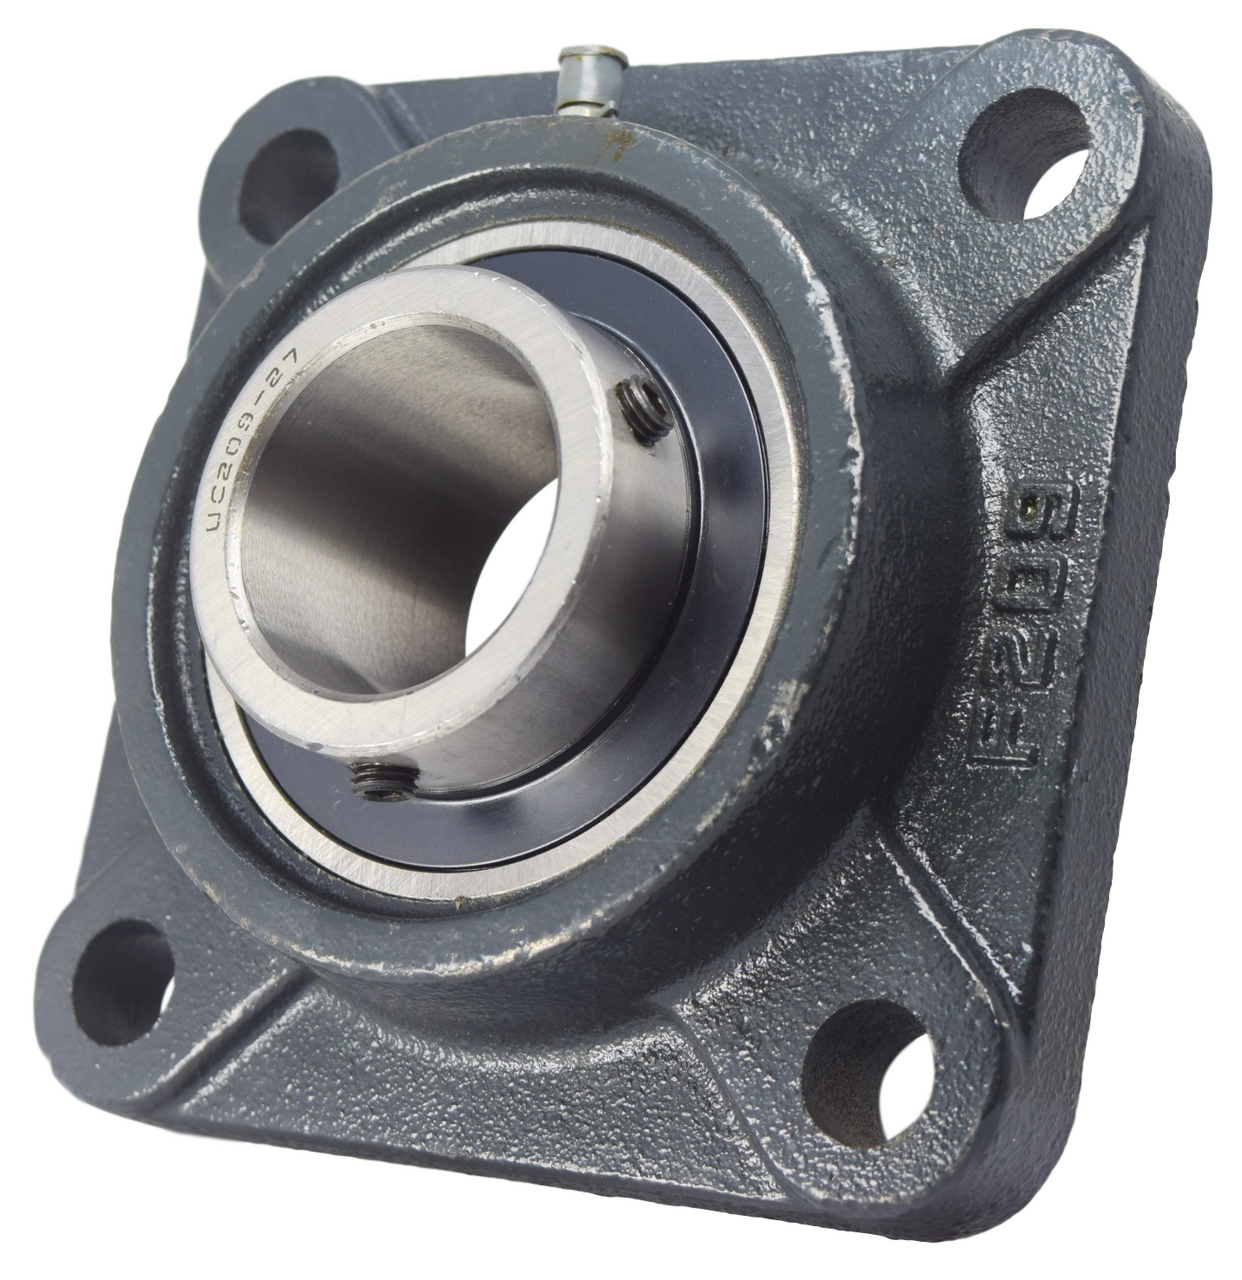 #AA58DL 1 Pcs UCF209-27 4 Bolt Square Flange Block Mounted Bearing Unit 1-11/16 Bore Compatible with AMI UCF209-28 Compatible with Browning VF4S-228 